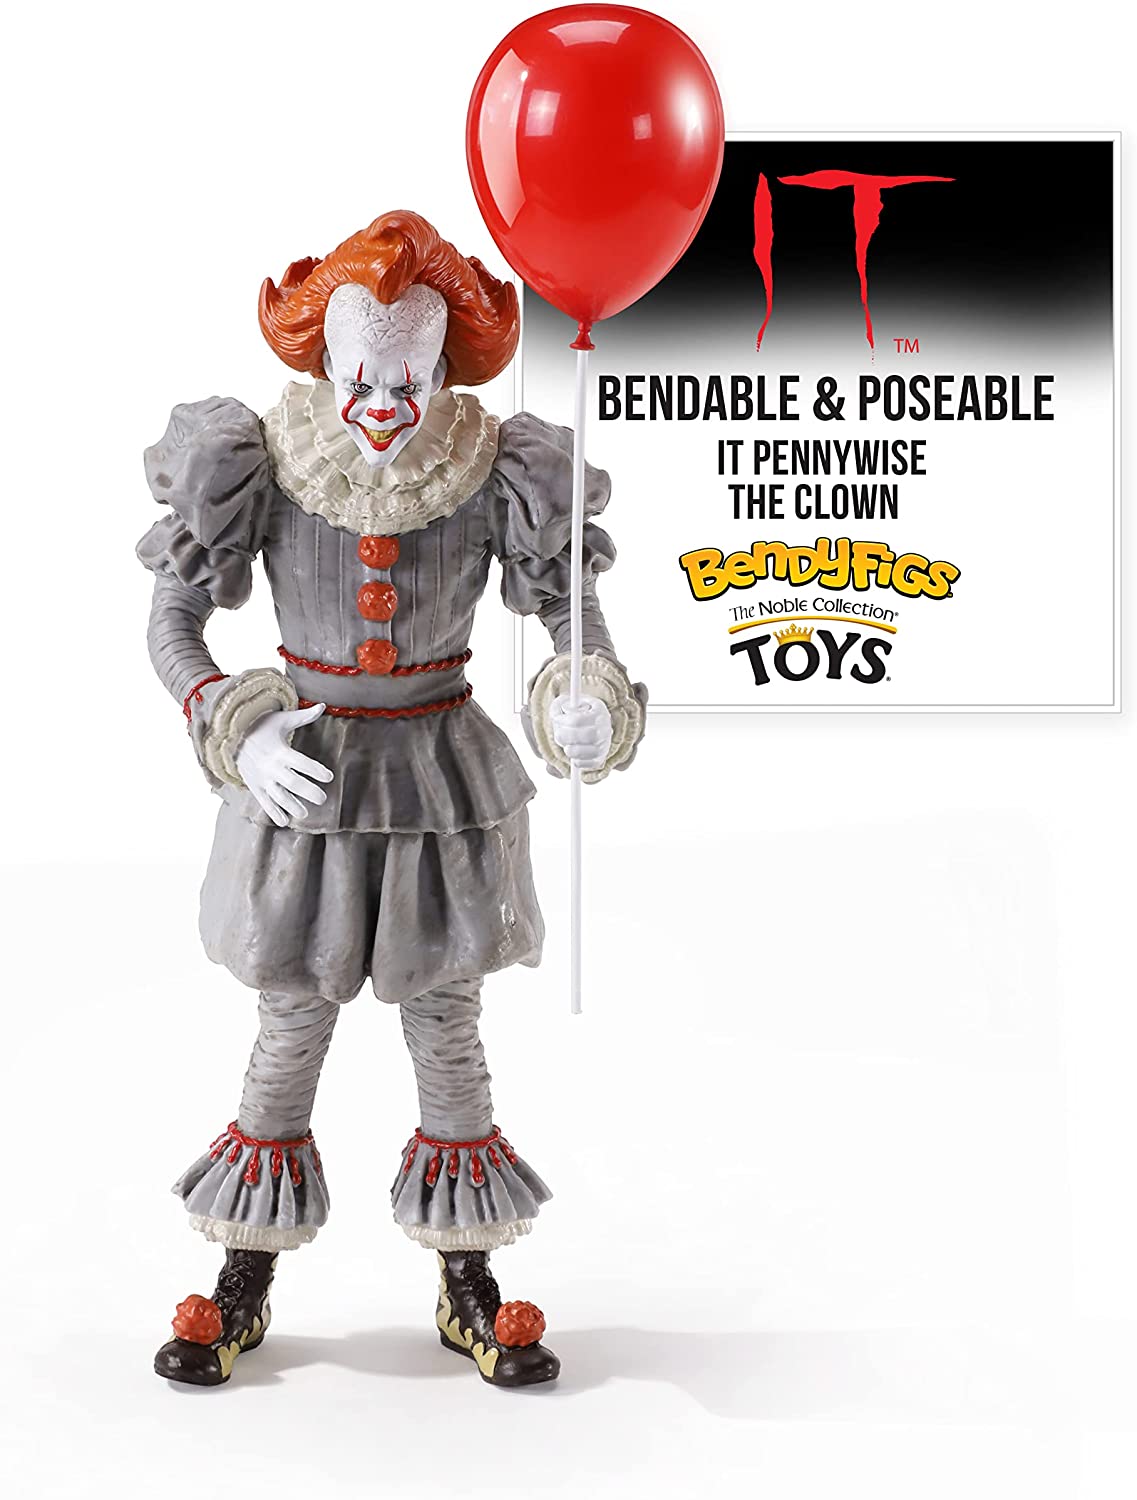 Bendyfigs/Pennywise - It [Toy]